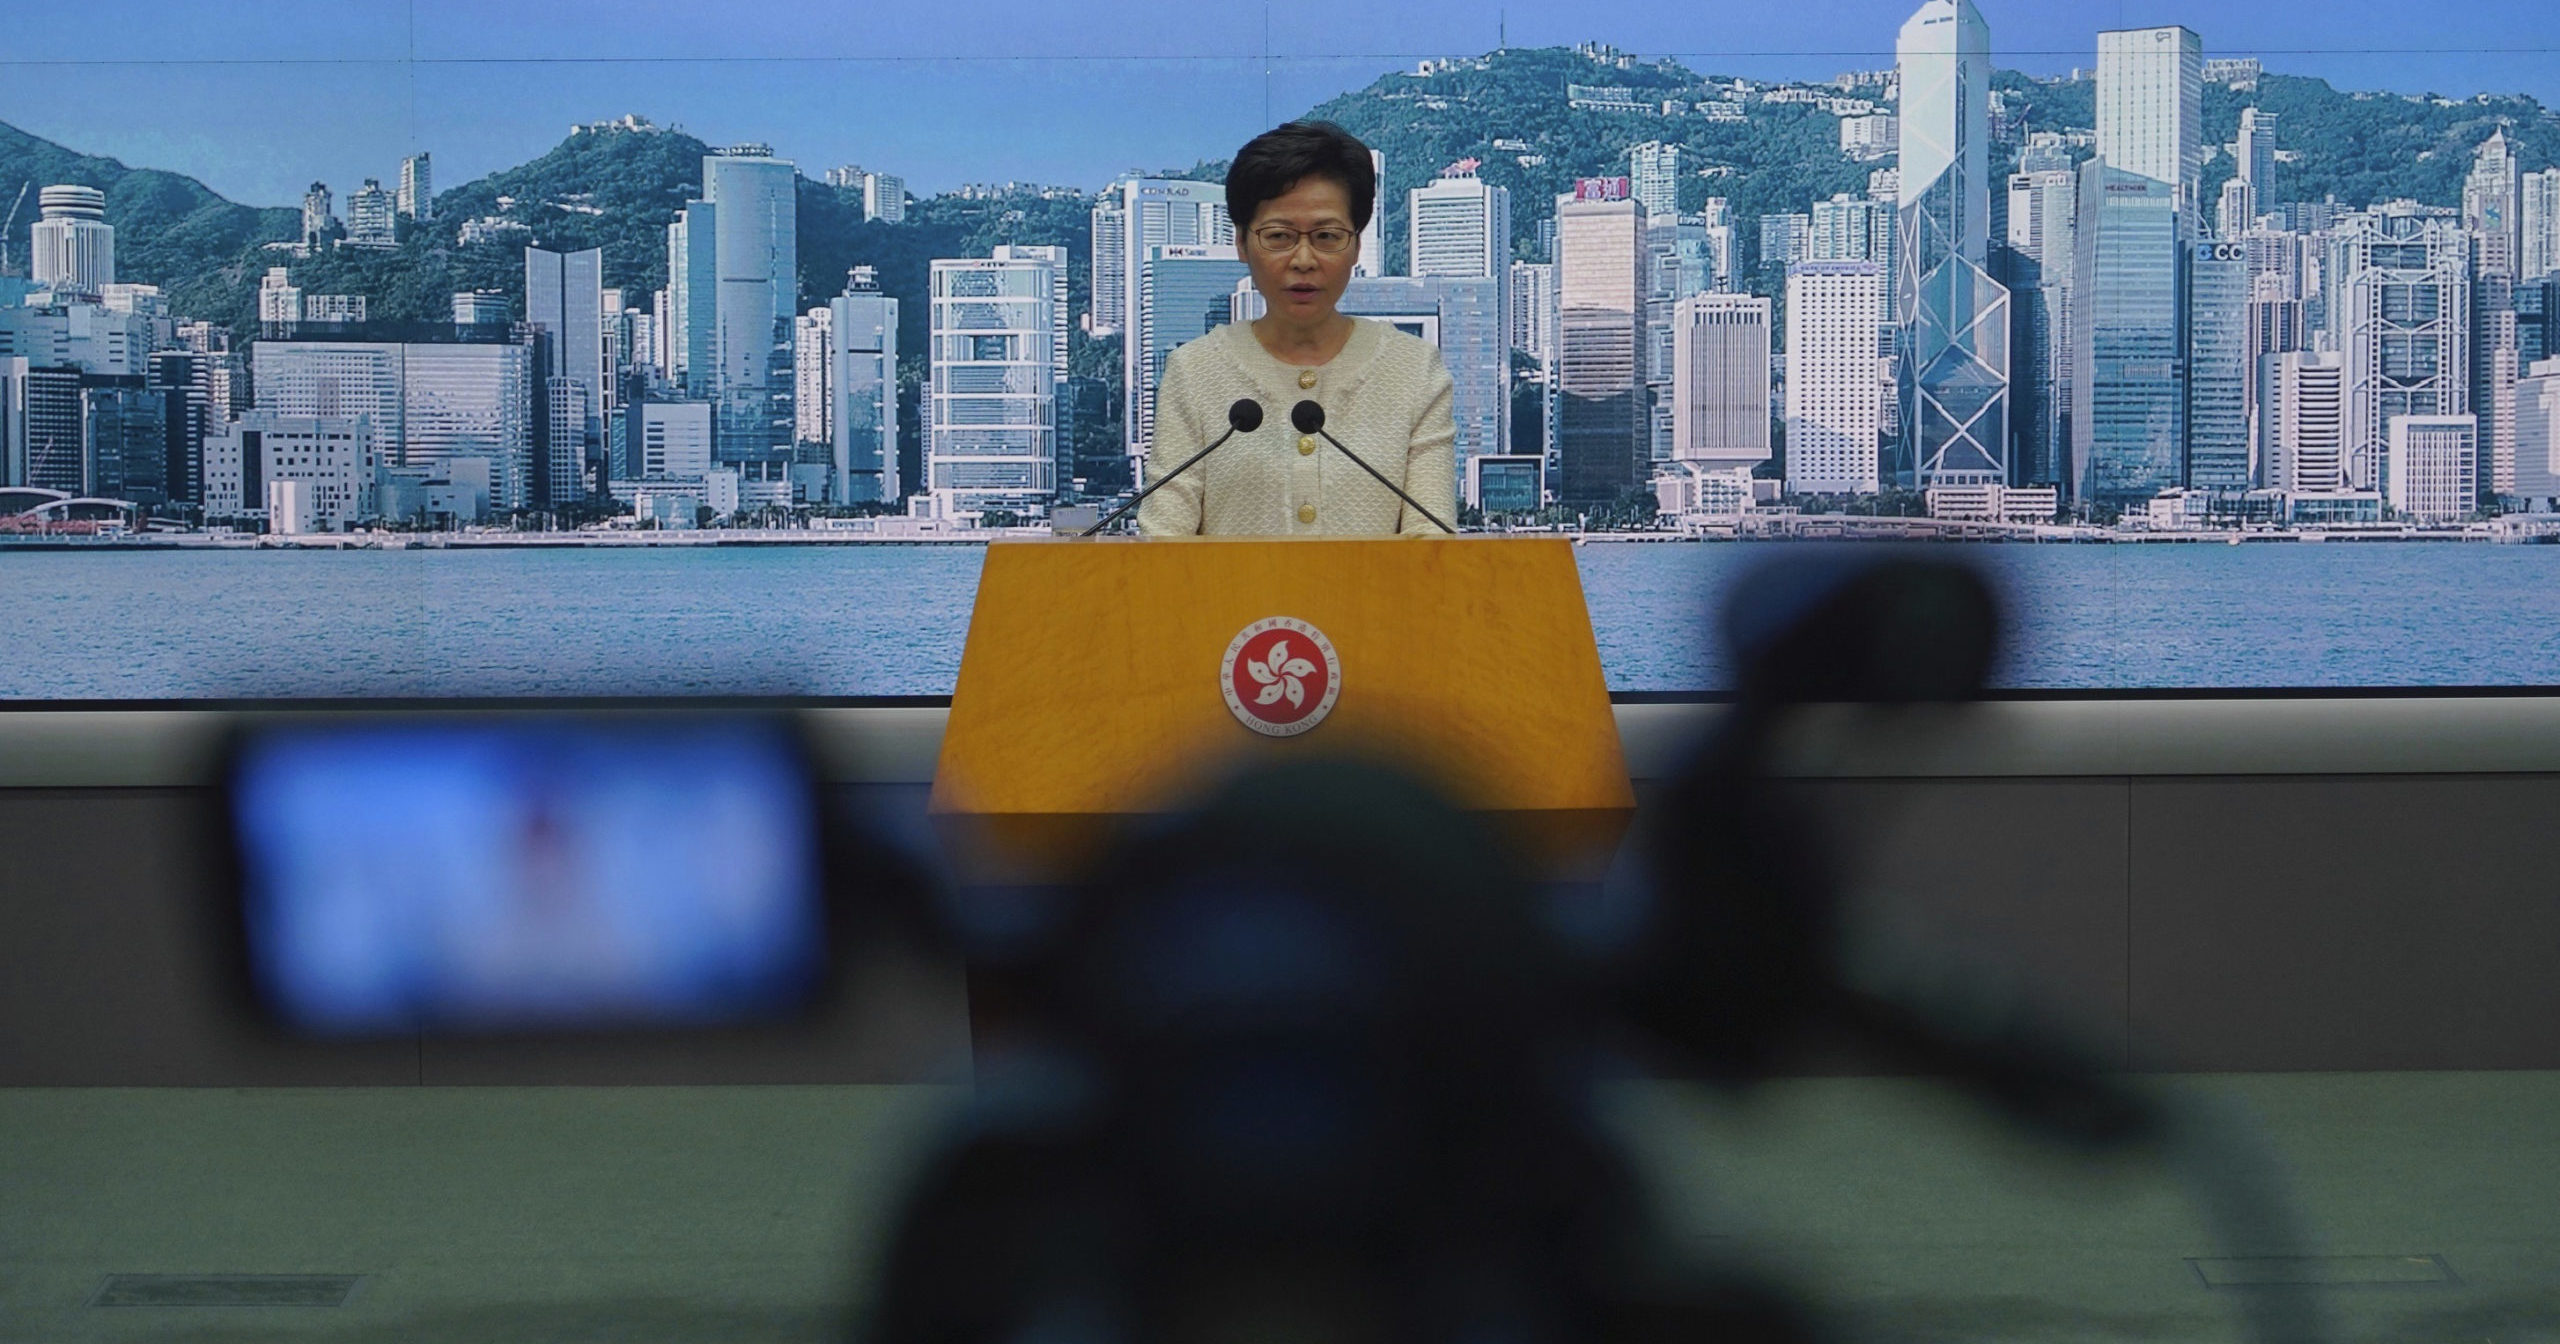 Hong Kong Chief Executive Carrie Lam listens to reporters' questions during a news conference in Hong Kong on July 7, 2020.